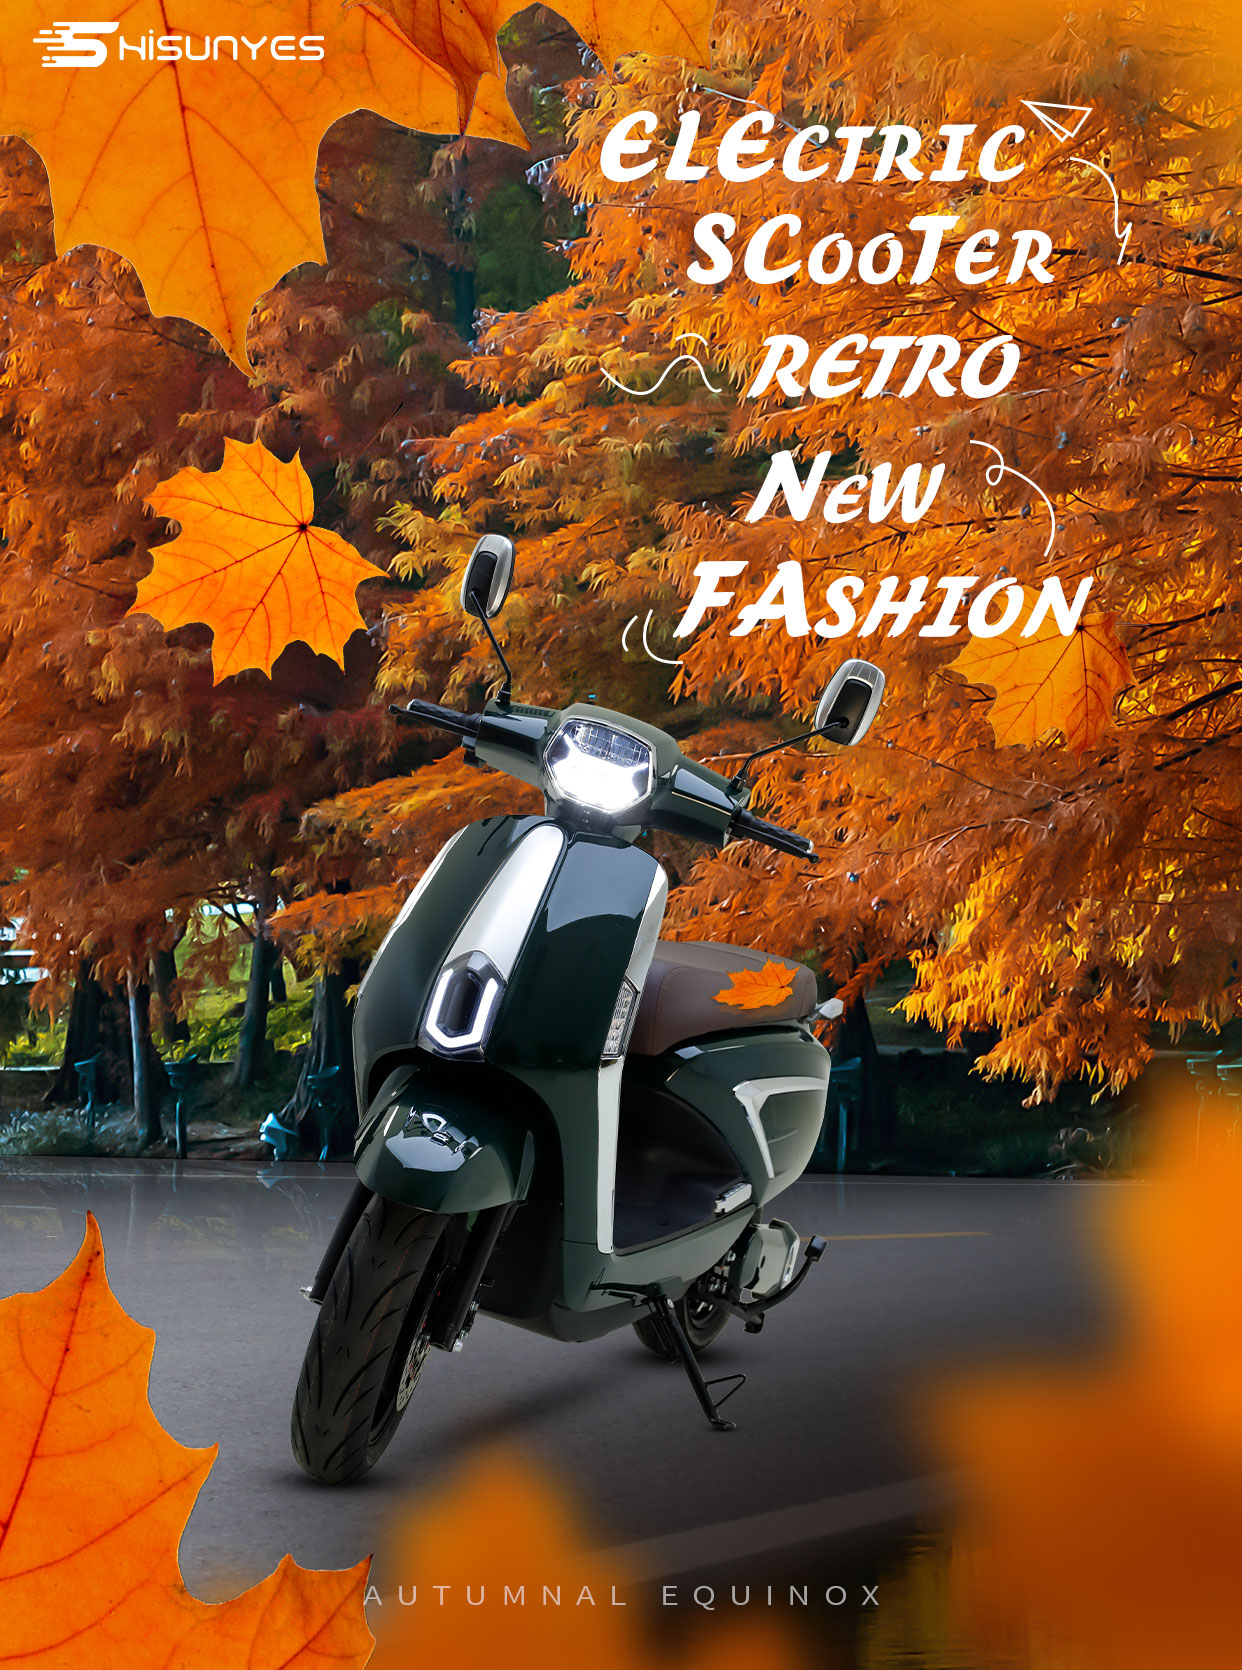 The Beauty of Autumn about electric scooter DT7